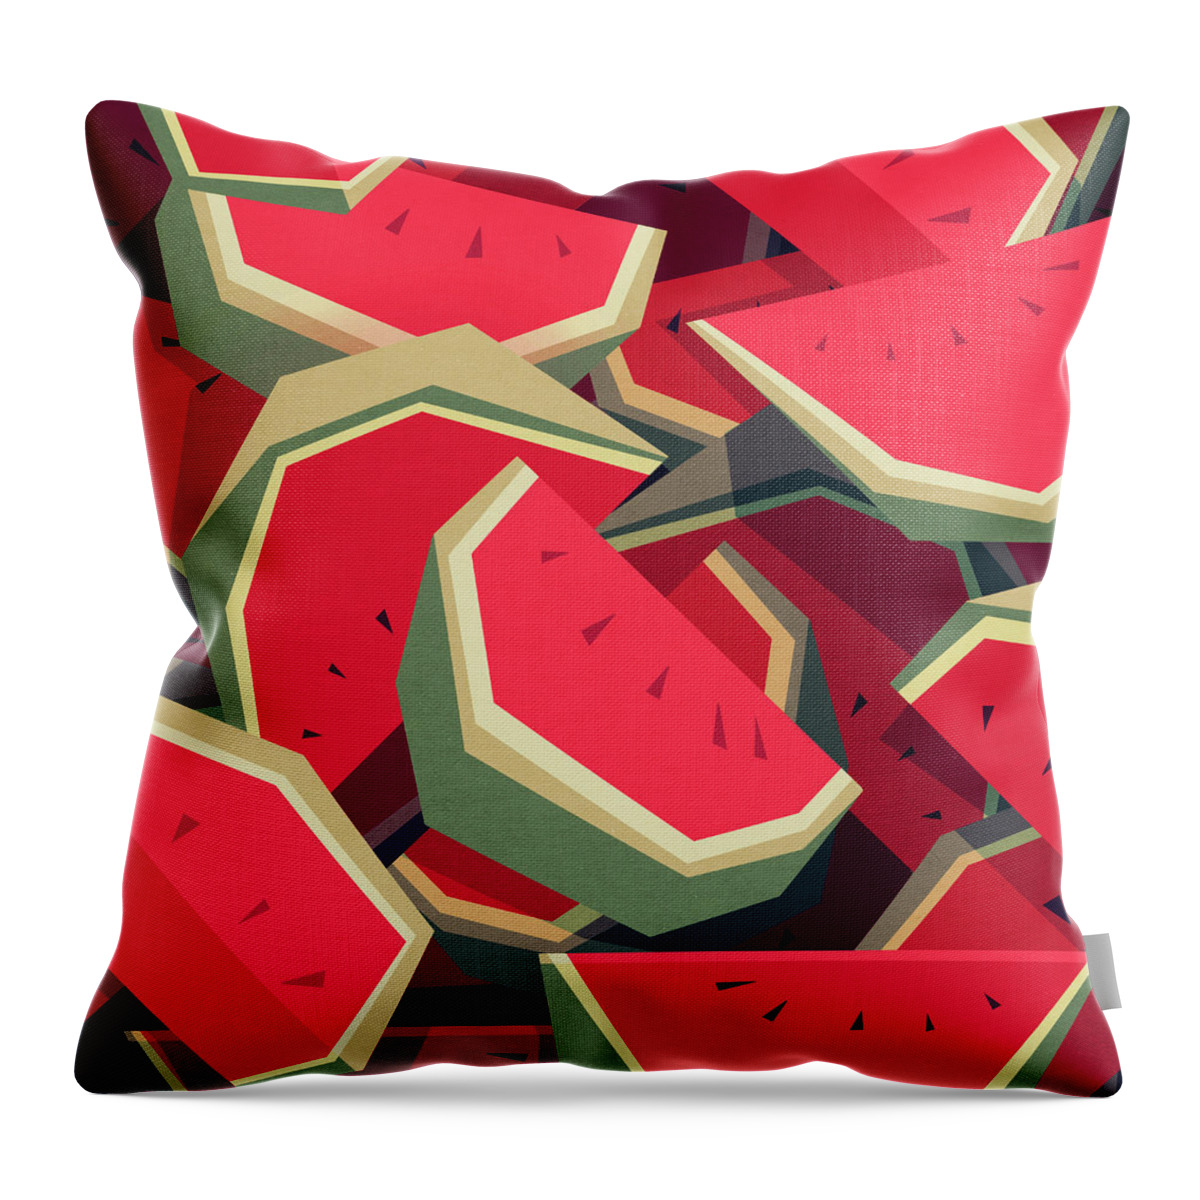 Watermelon Throw Pillow featuring the digital art Too many watermelons by Yetiland